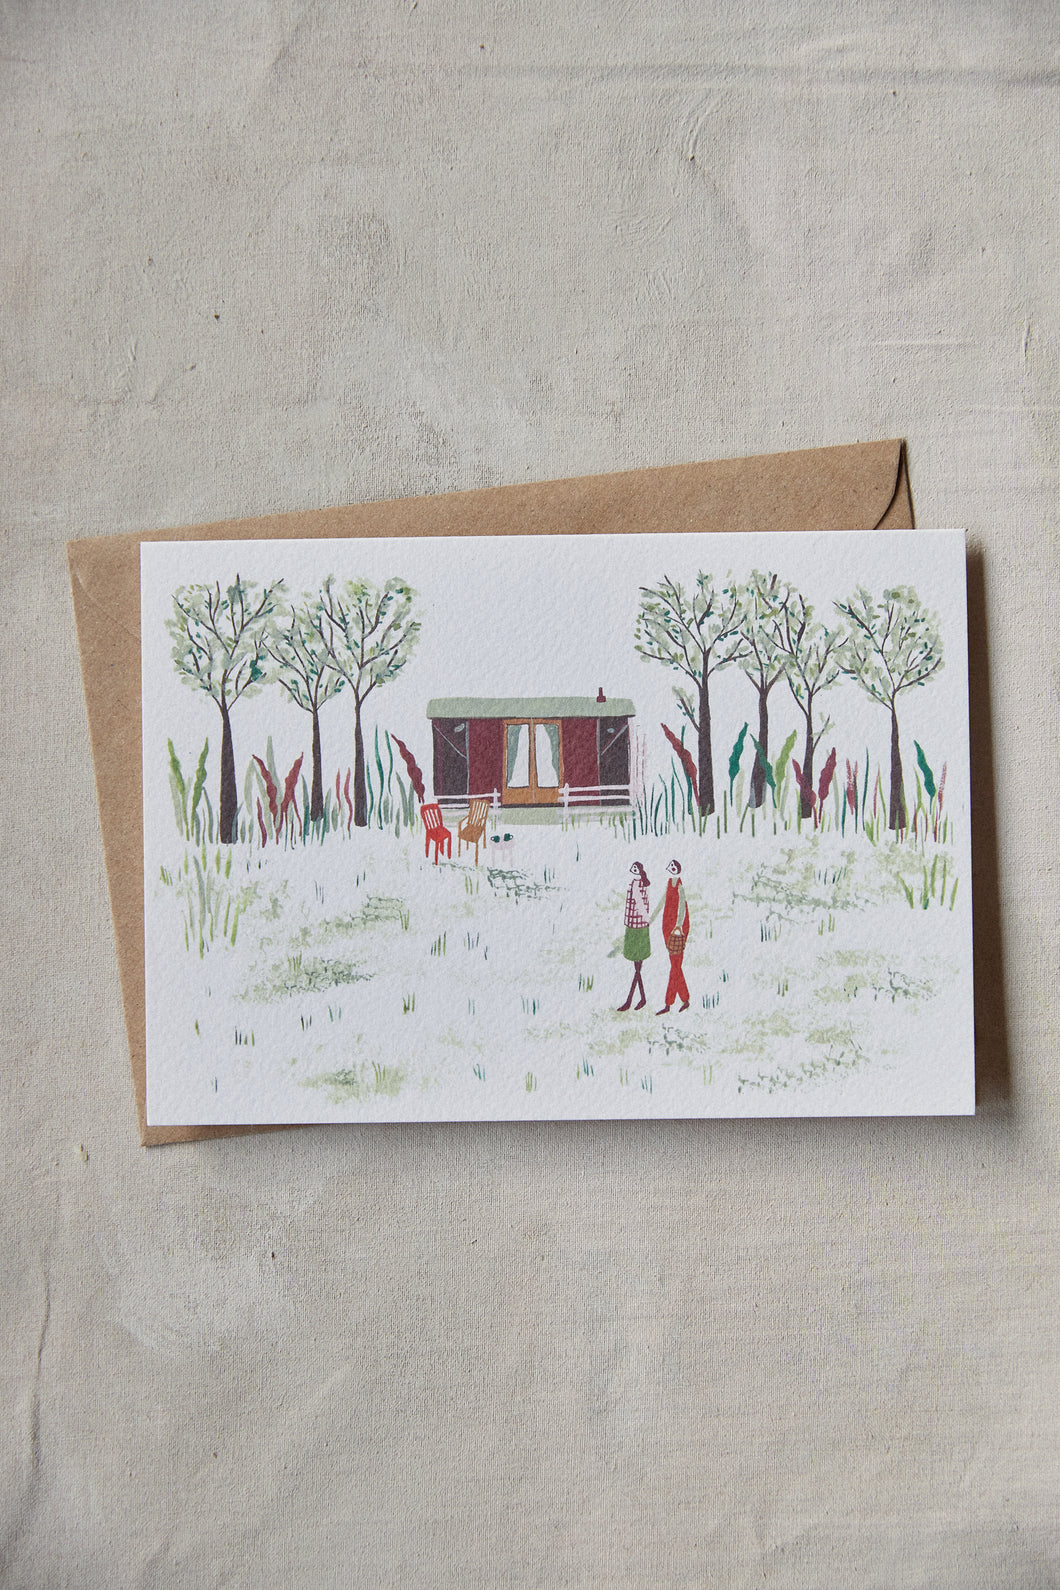 Shop at Settle | Harriet Watson A Walk in the Woods - charming hand illustrated colour greetings card of two guests enjoying a walk in Settle's wooded park, with Carriage No. 2 nestled in the background, set against a pale timber surface.